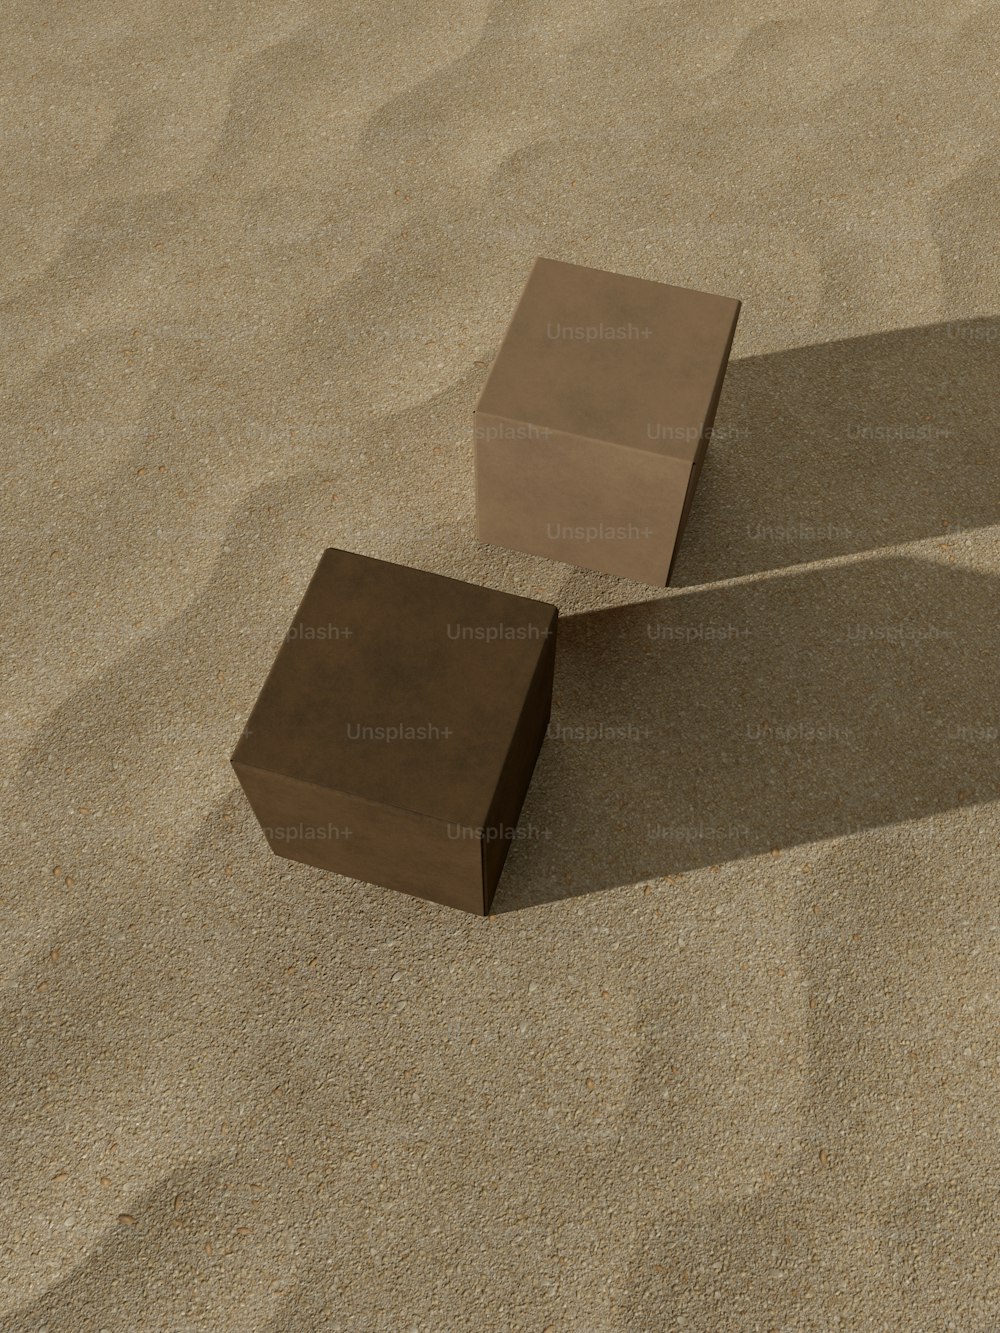 a couple of blocks sitting on top of a sandy beach